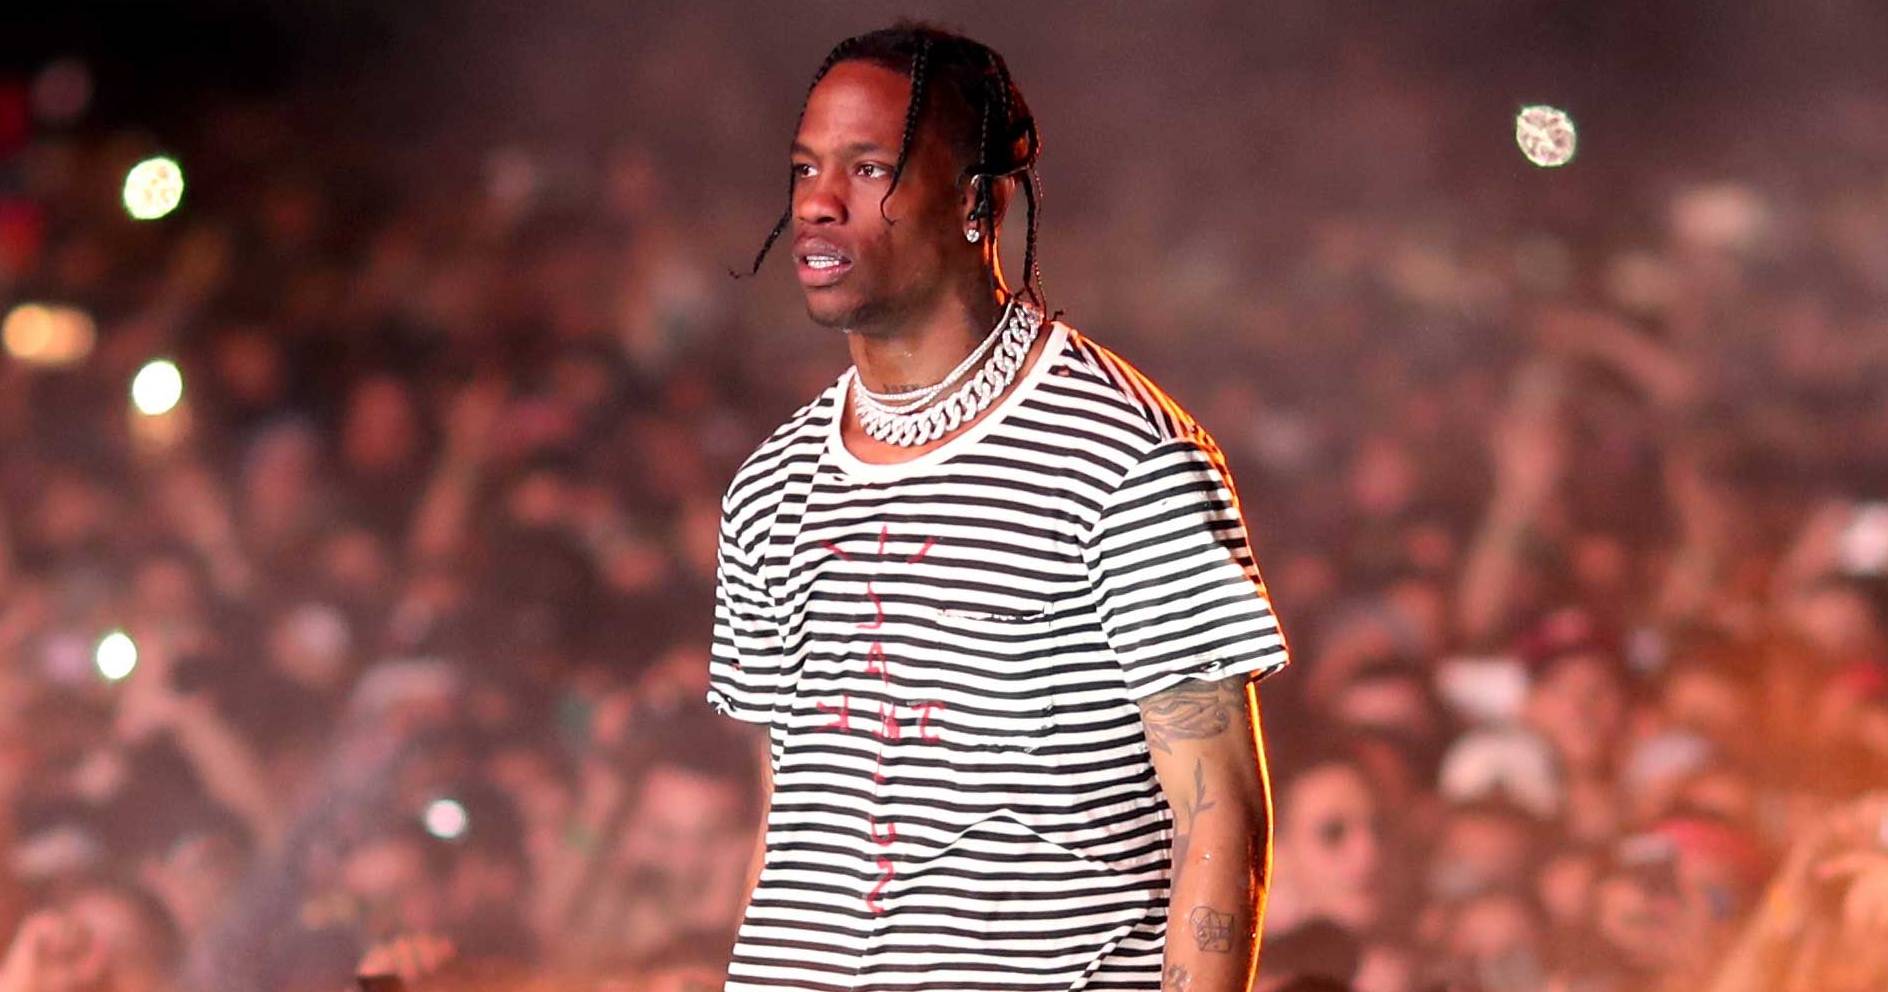 A man in striped shirt and headphones at concert - Travis Scott